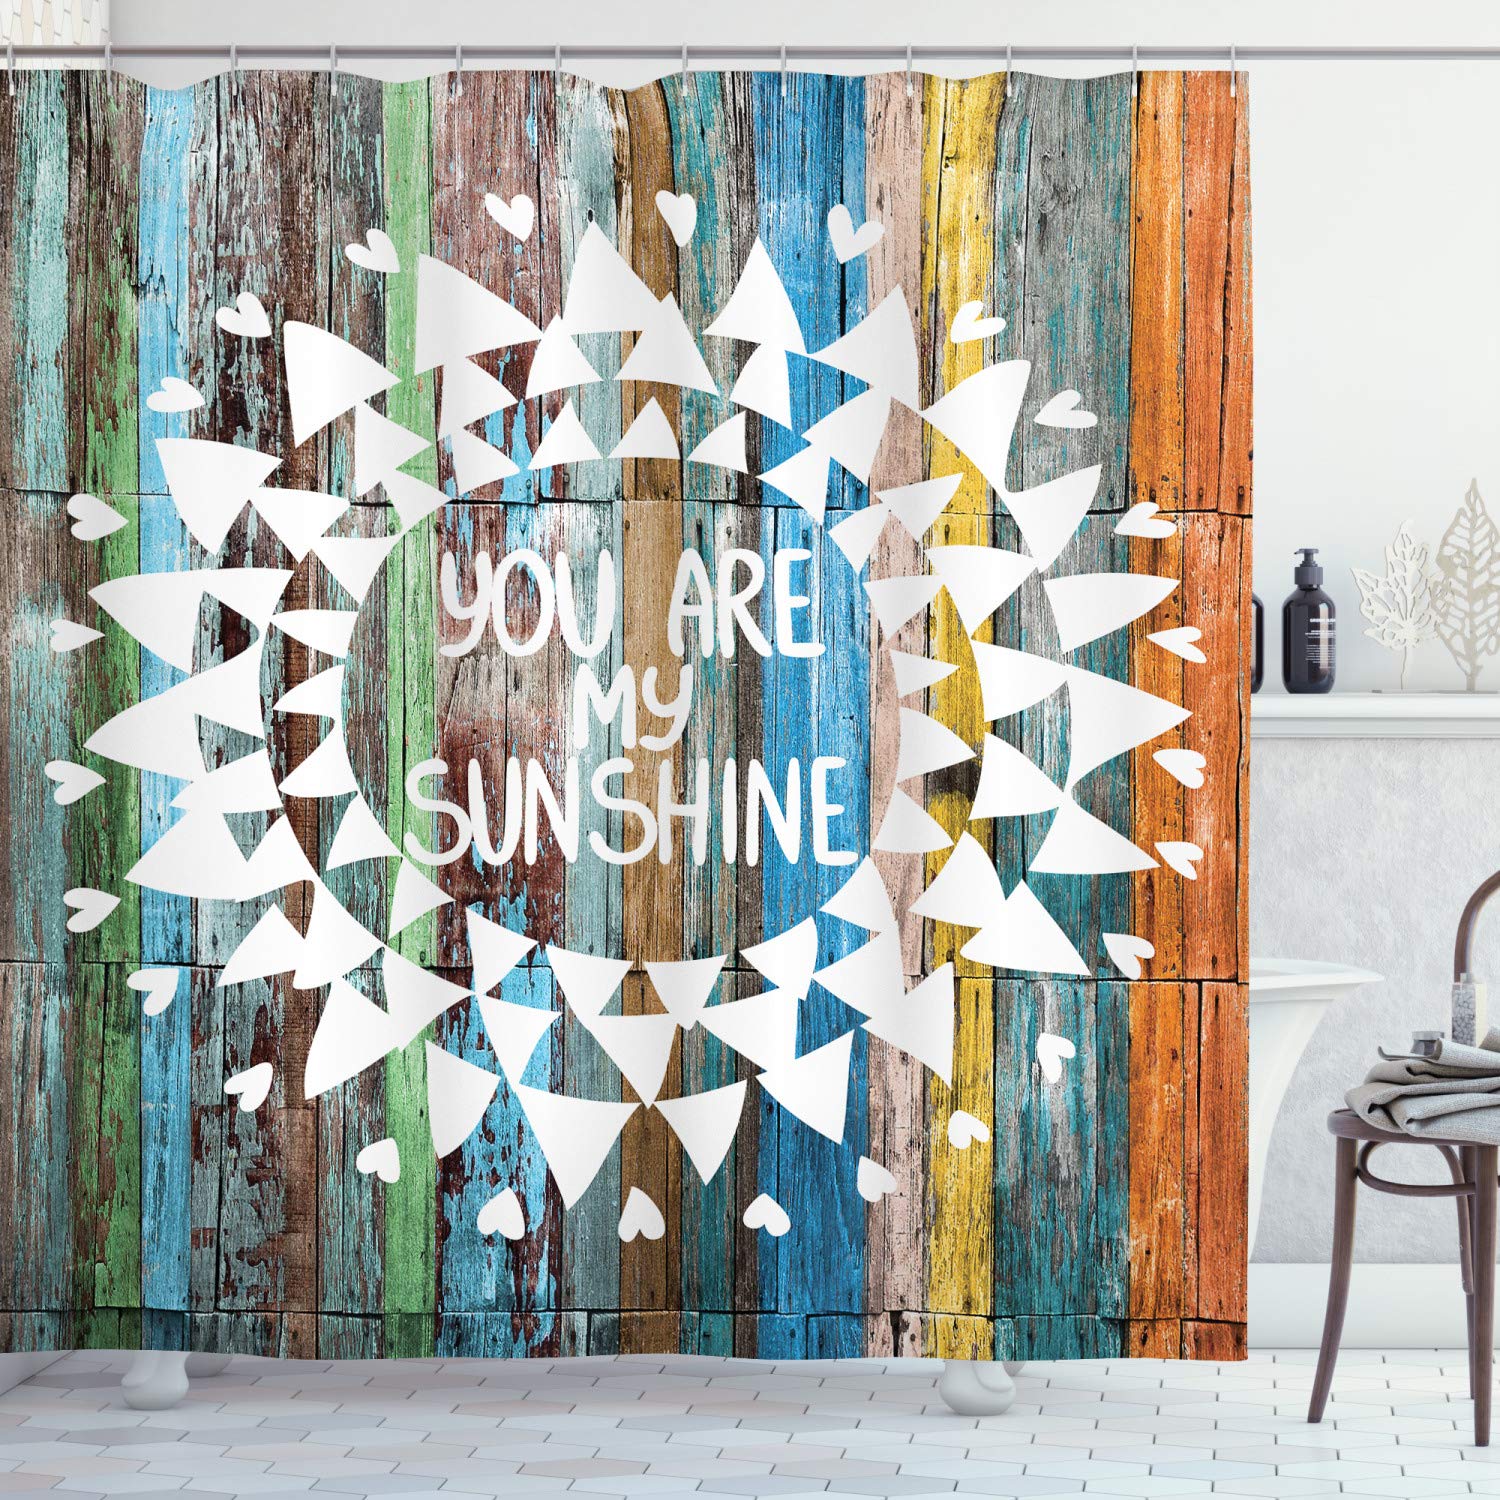 Ambesonne Rustic Decor Collection, Love Quotes You are My Sunshine on Wooden Planks Sun Lights, Polyester Fabric Bathroom Shower Curtain Set with Hooks, Orange White Green Yellow Blue